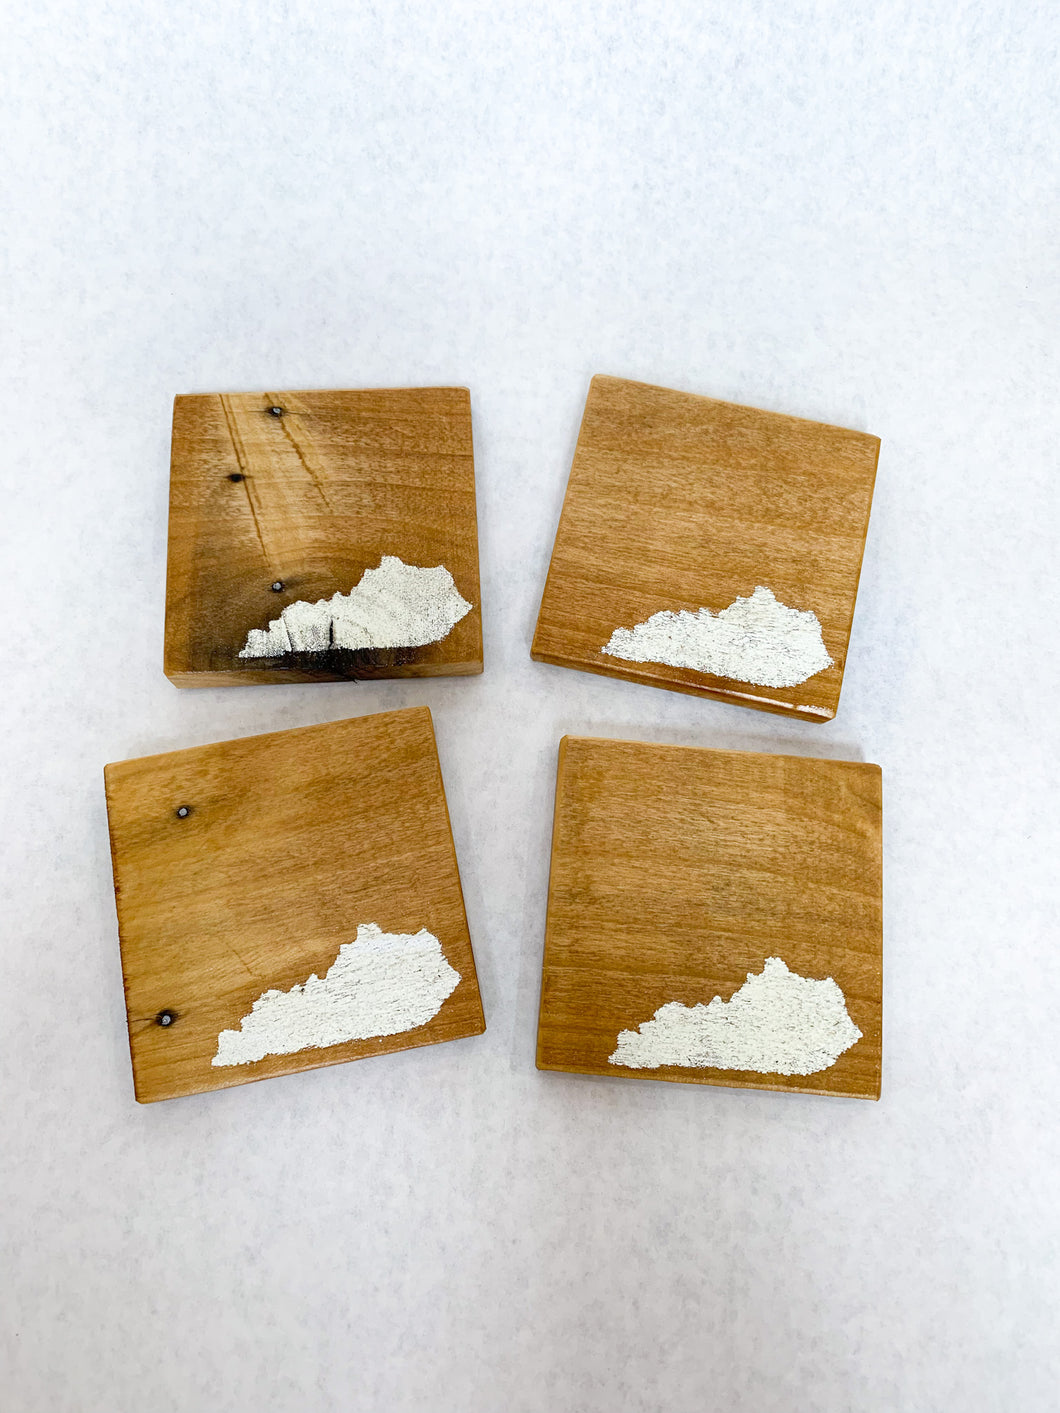 Set of 4 Natural State of Kentucky Coasters